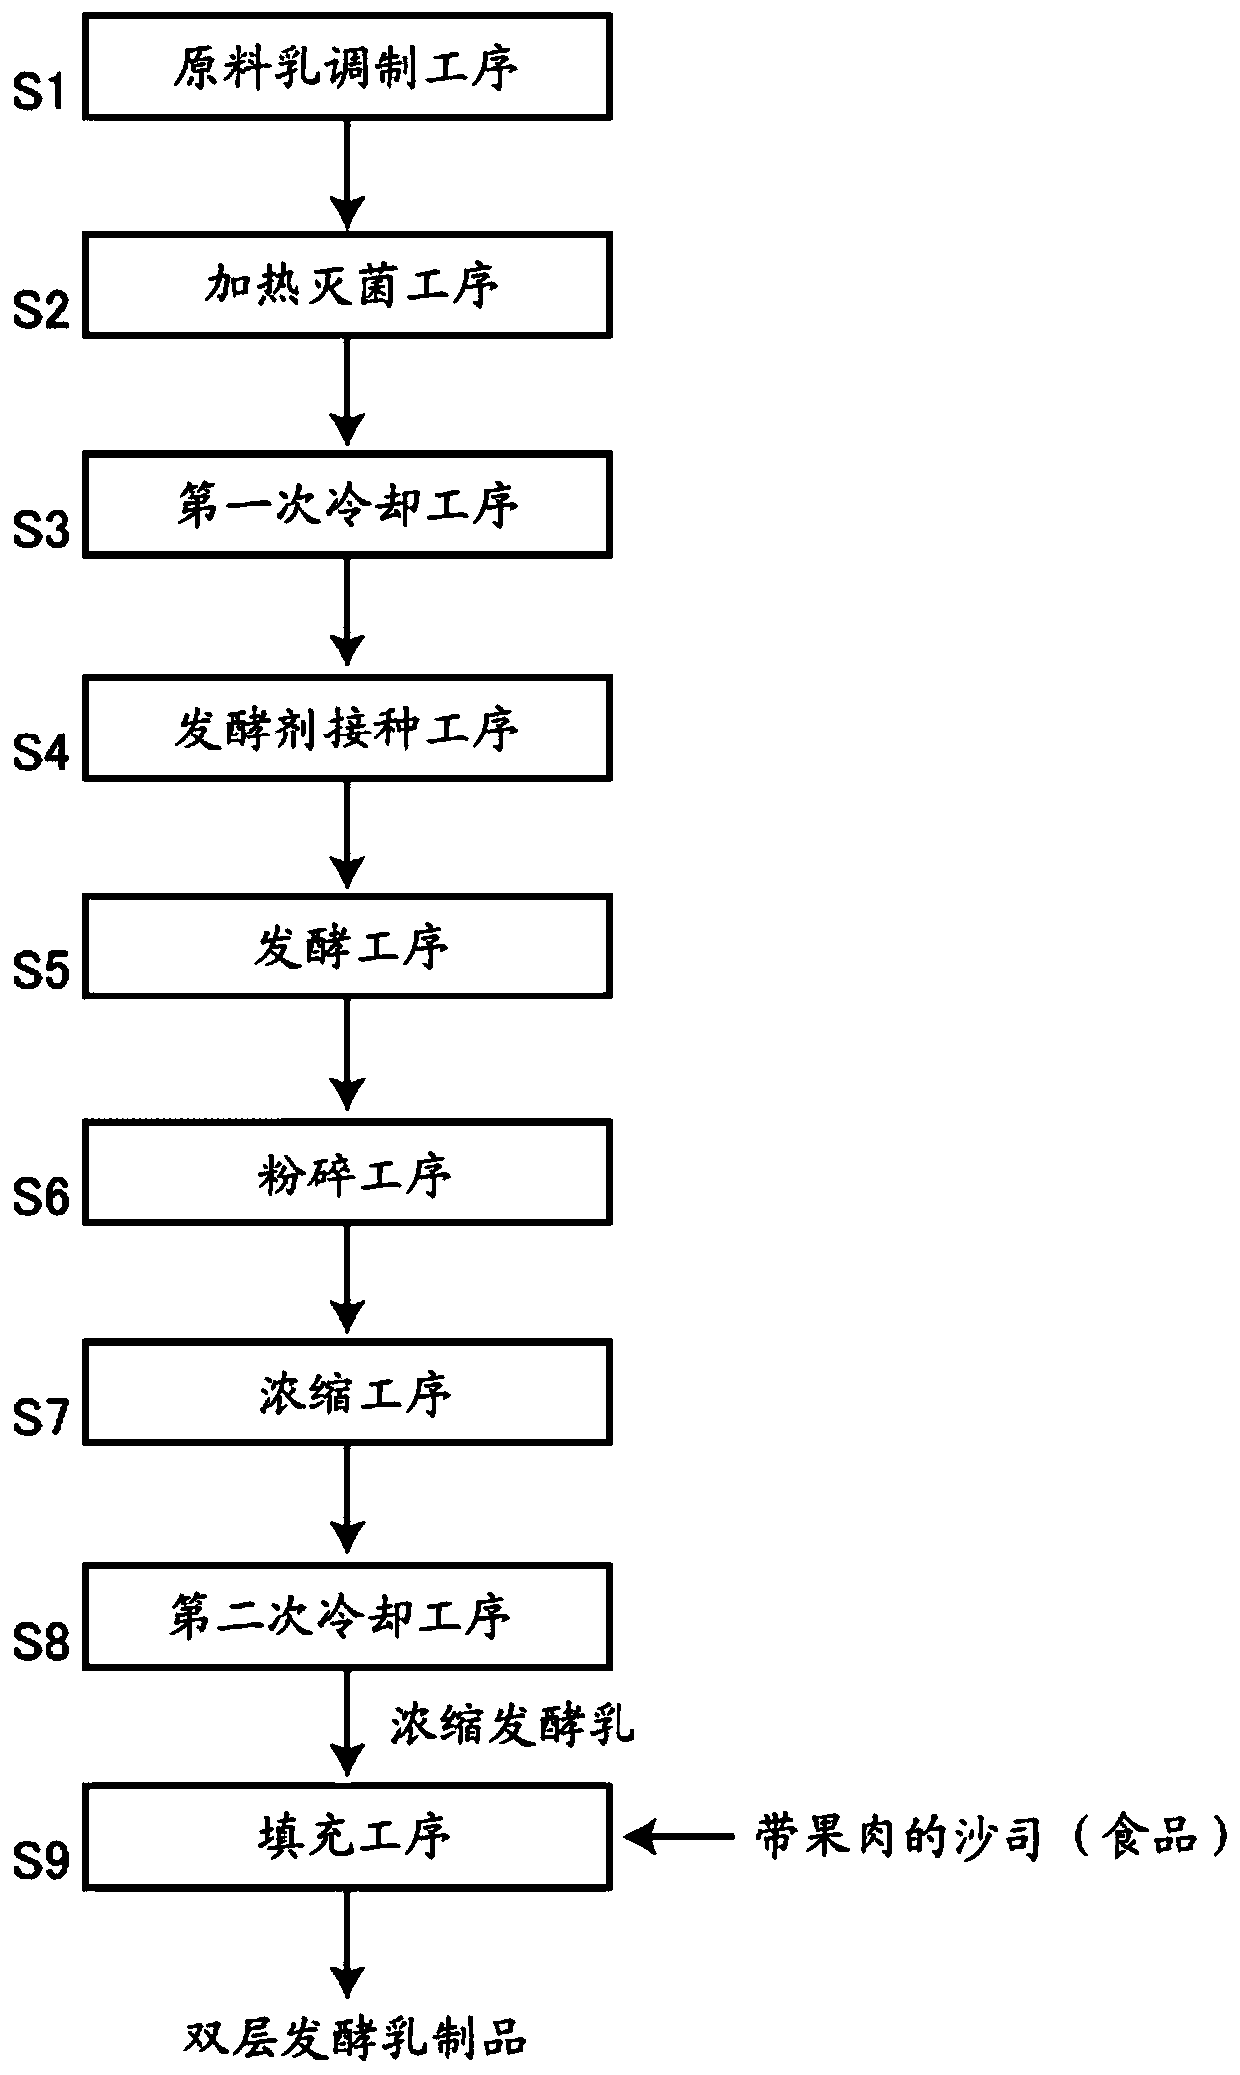 Bilayer-type fermented milk product and production method therefor